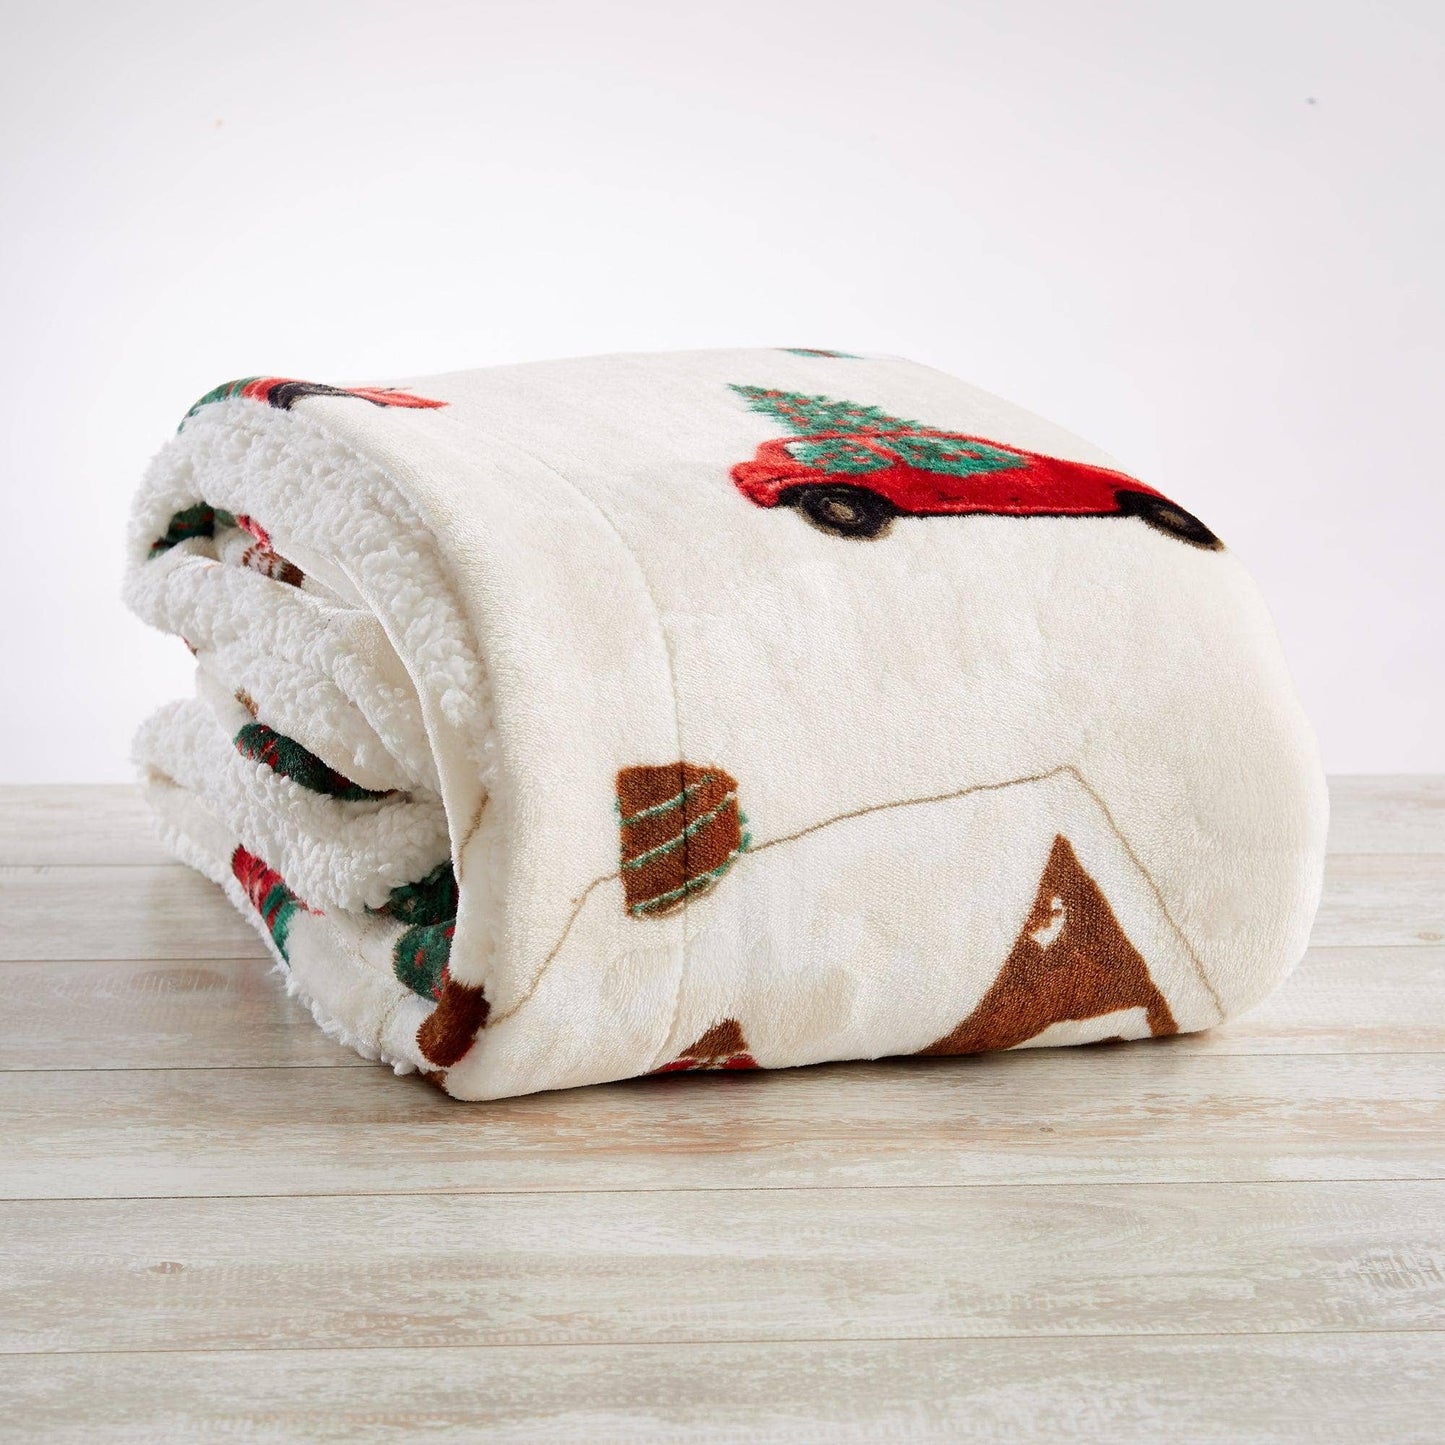 Holiday Sherpa Throw - Esmay Collection: 50" x 60" Throw / Painted Trucks